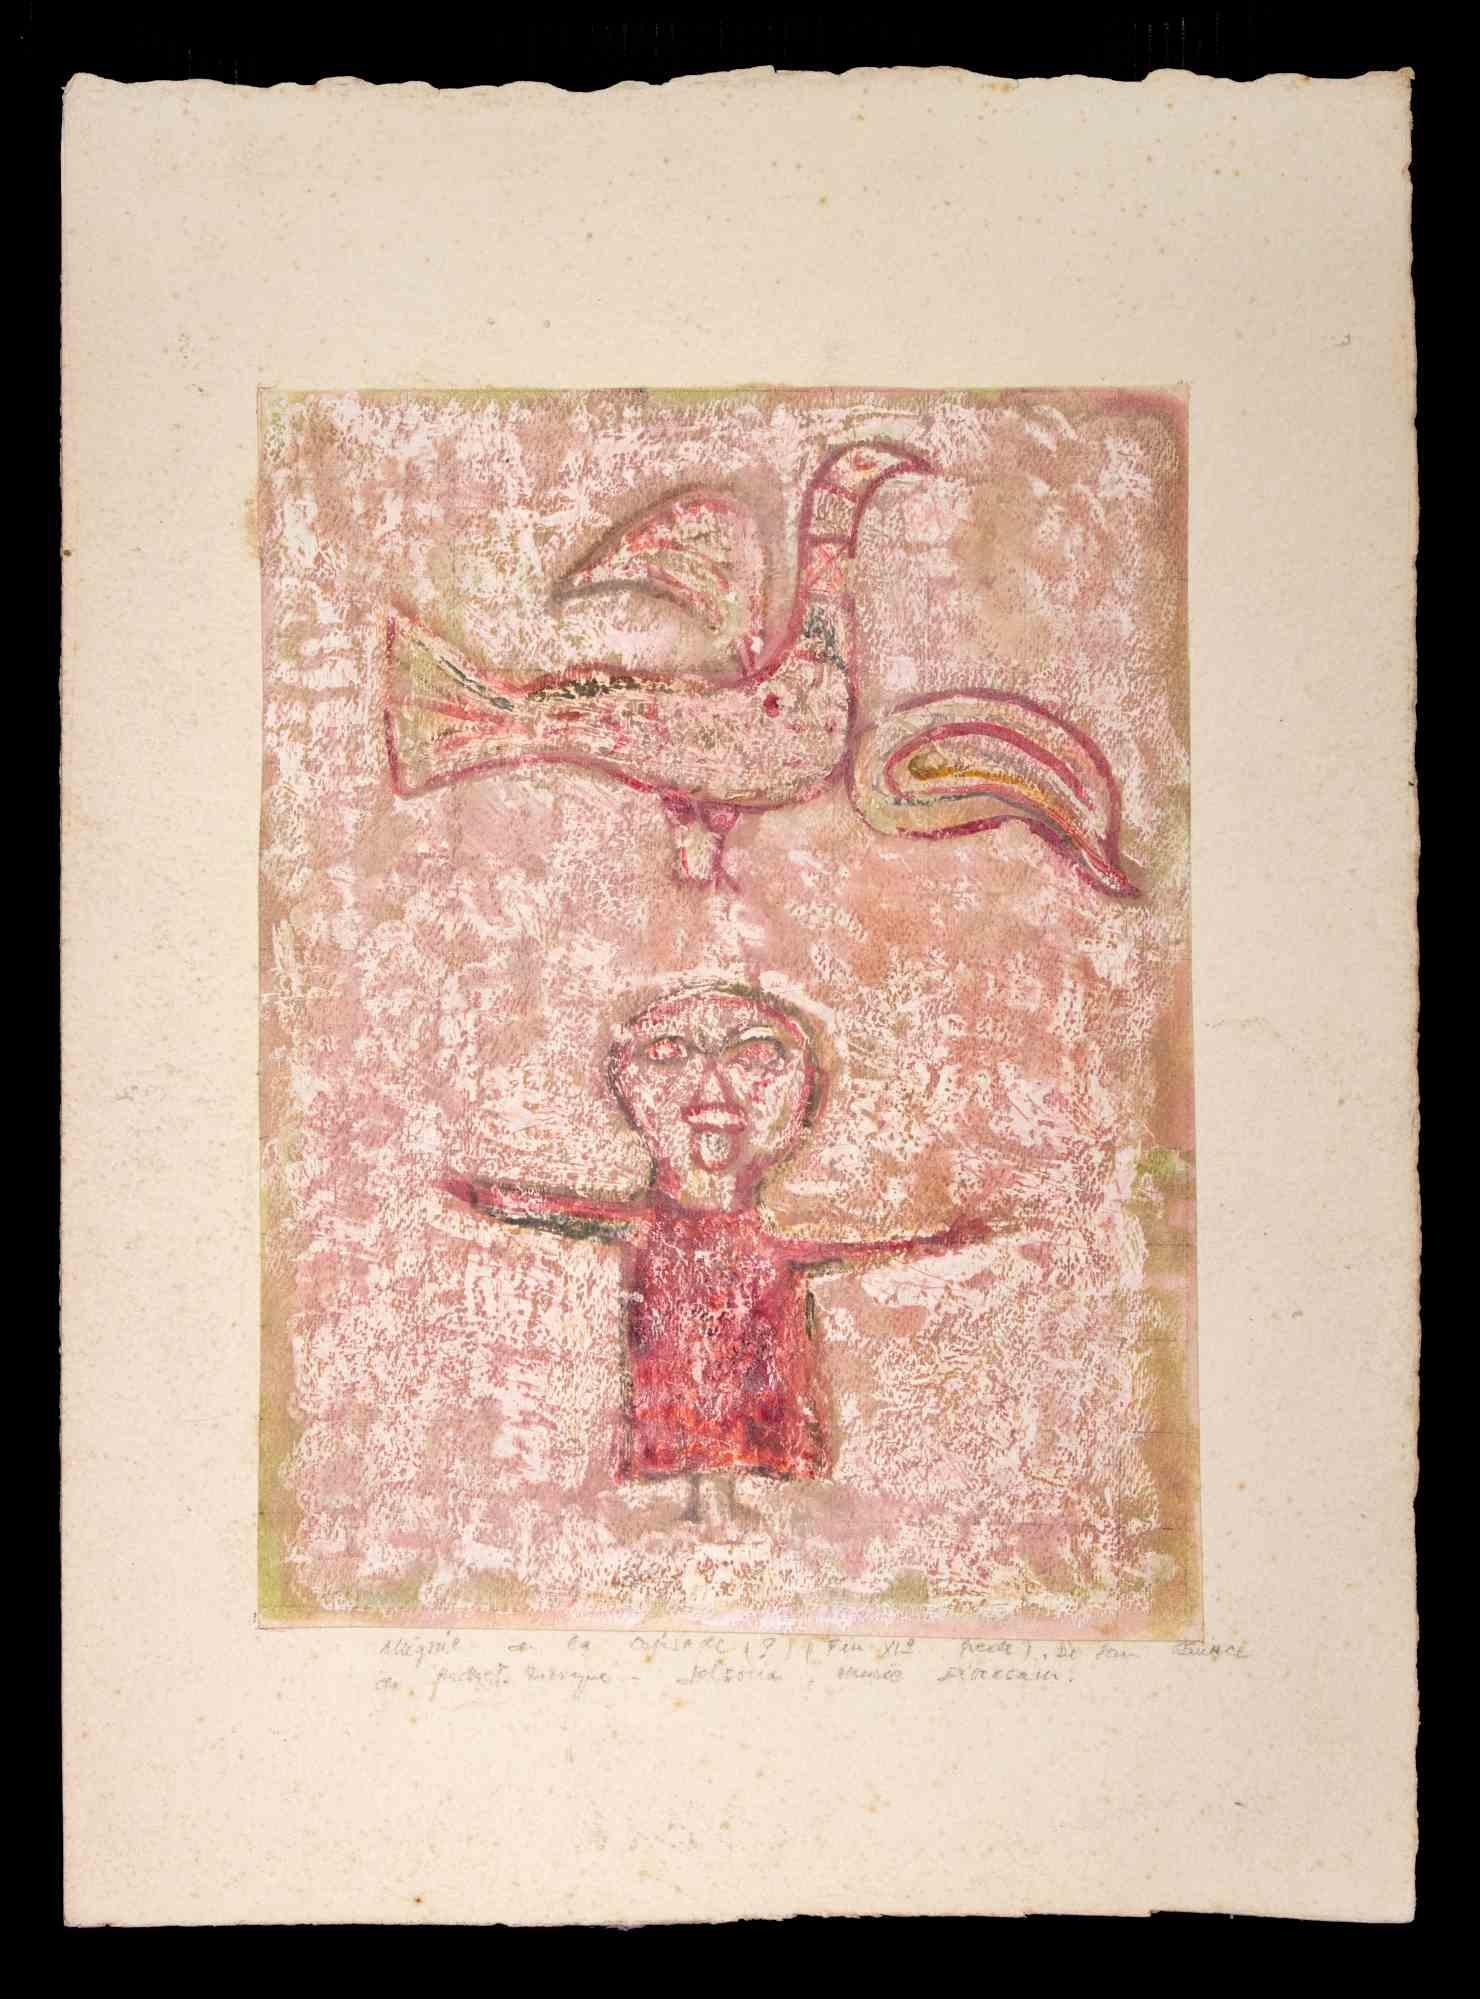  Allegory of a Bird - Original Drawing - Late 20th Century